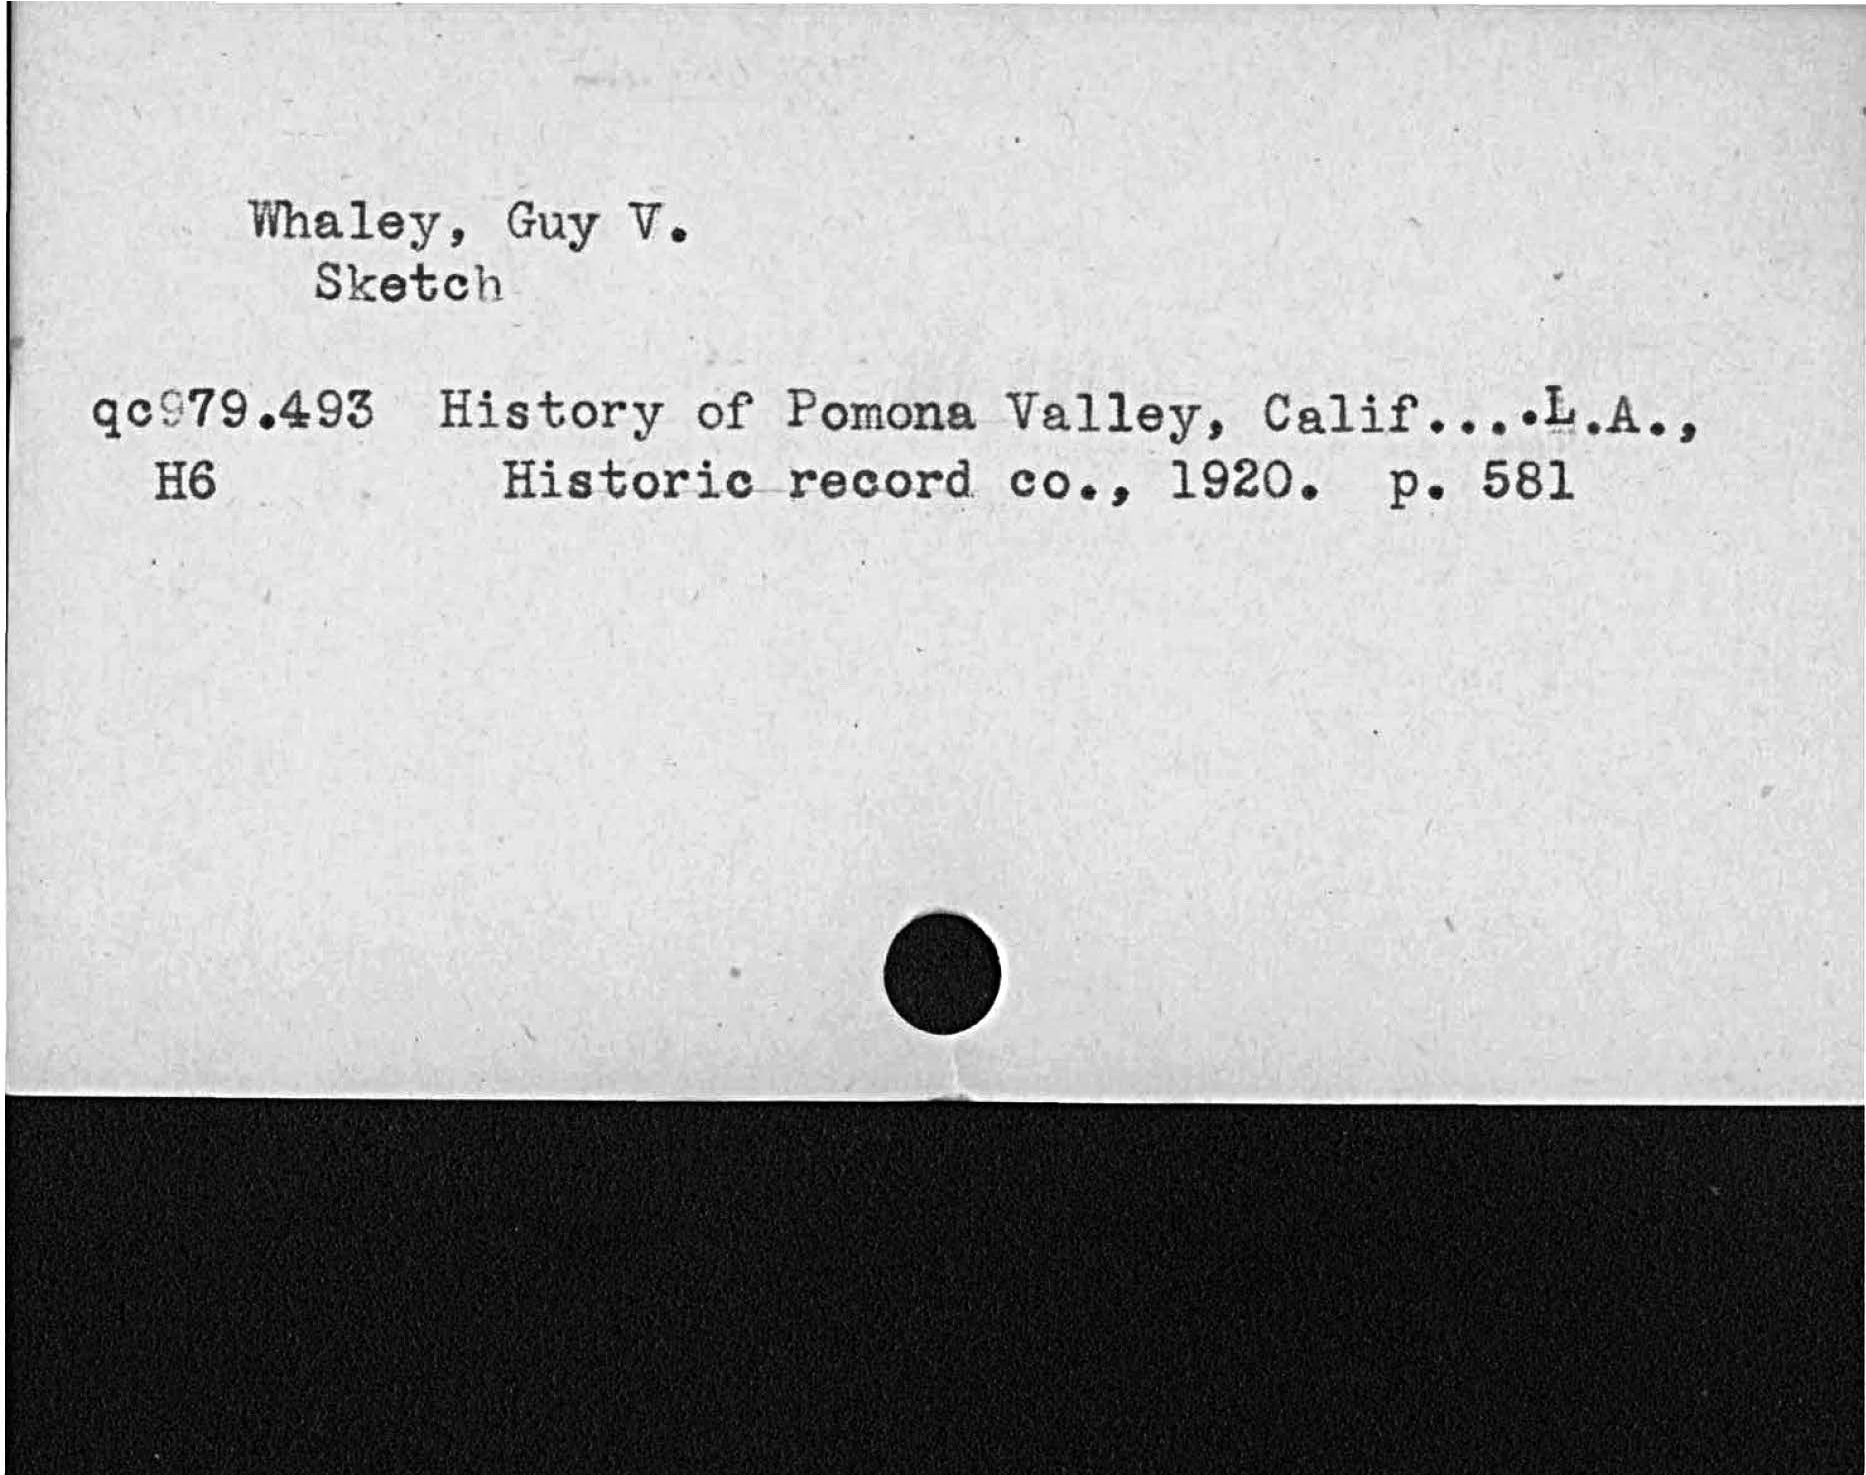 Whaley, Guy V.SketchHistory of Pomona Valley, Calif. A.Historic record co. 1920. p. 581   qc79. 493  H6